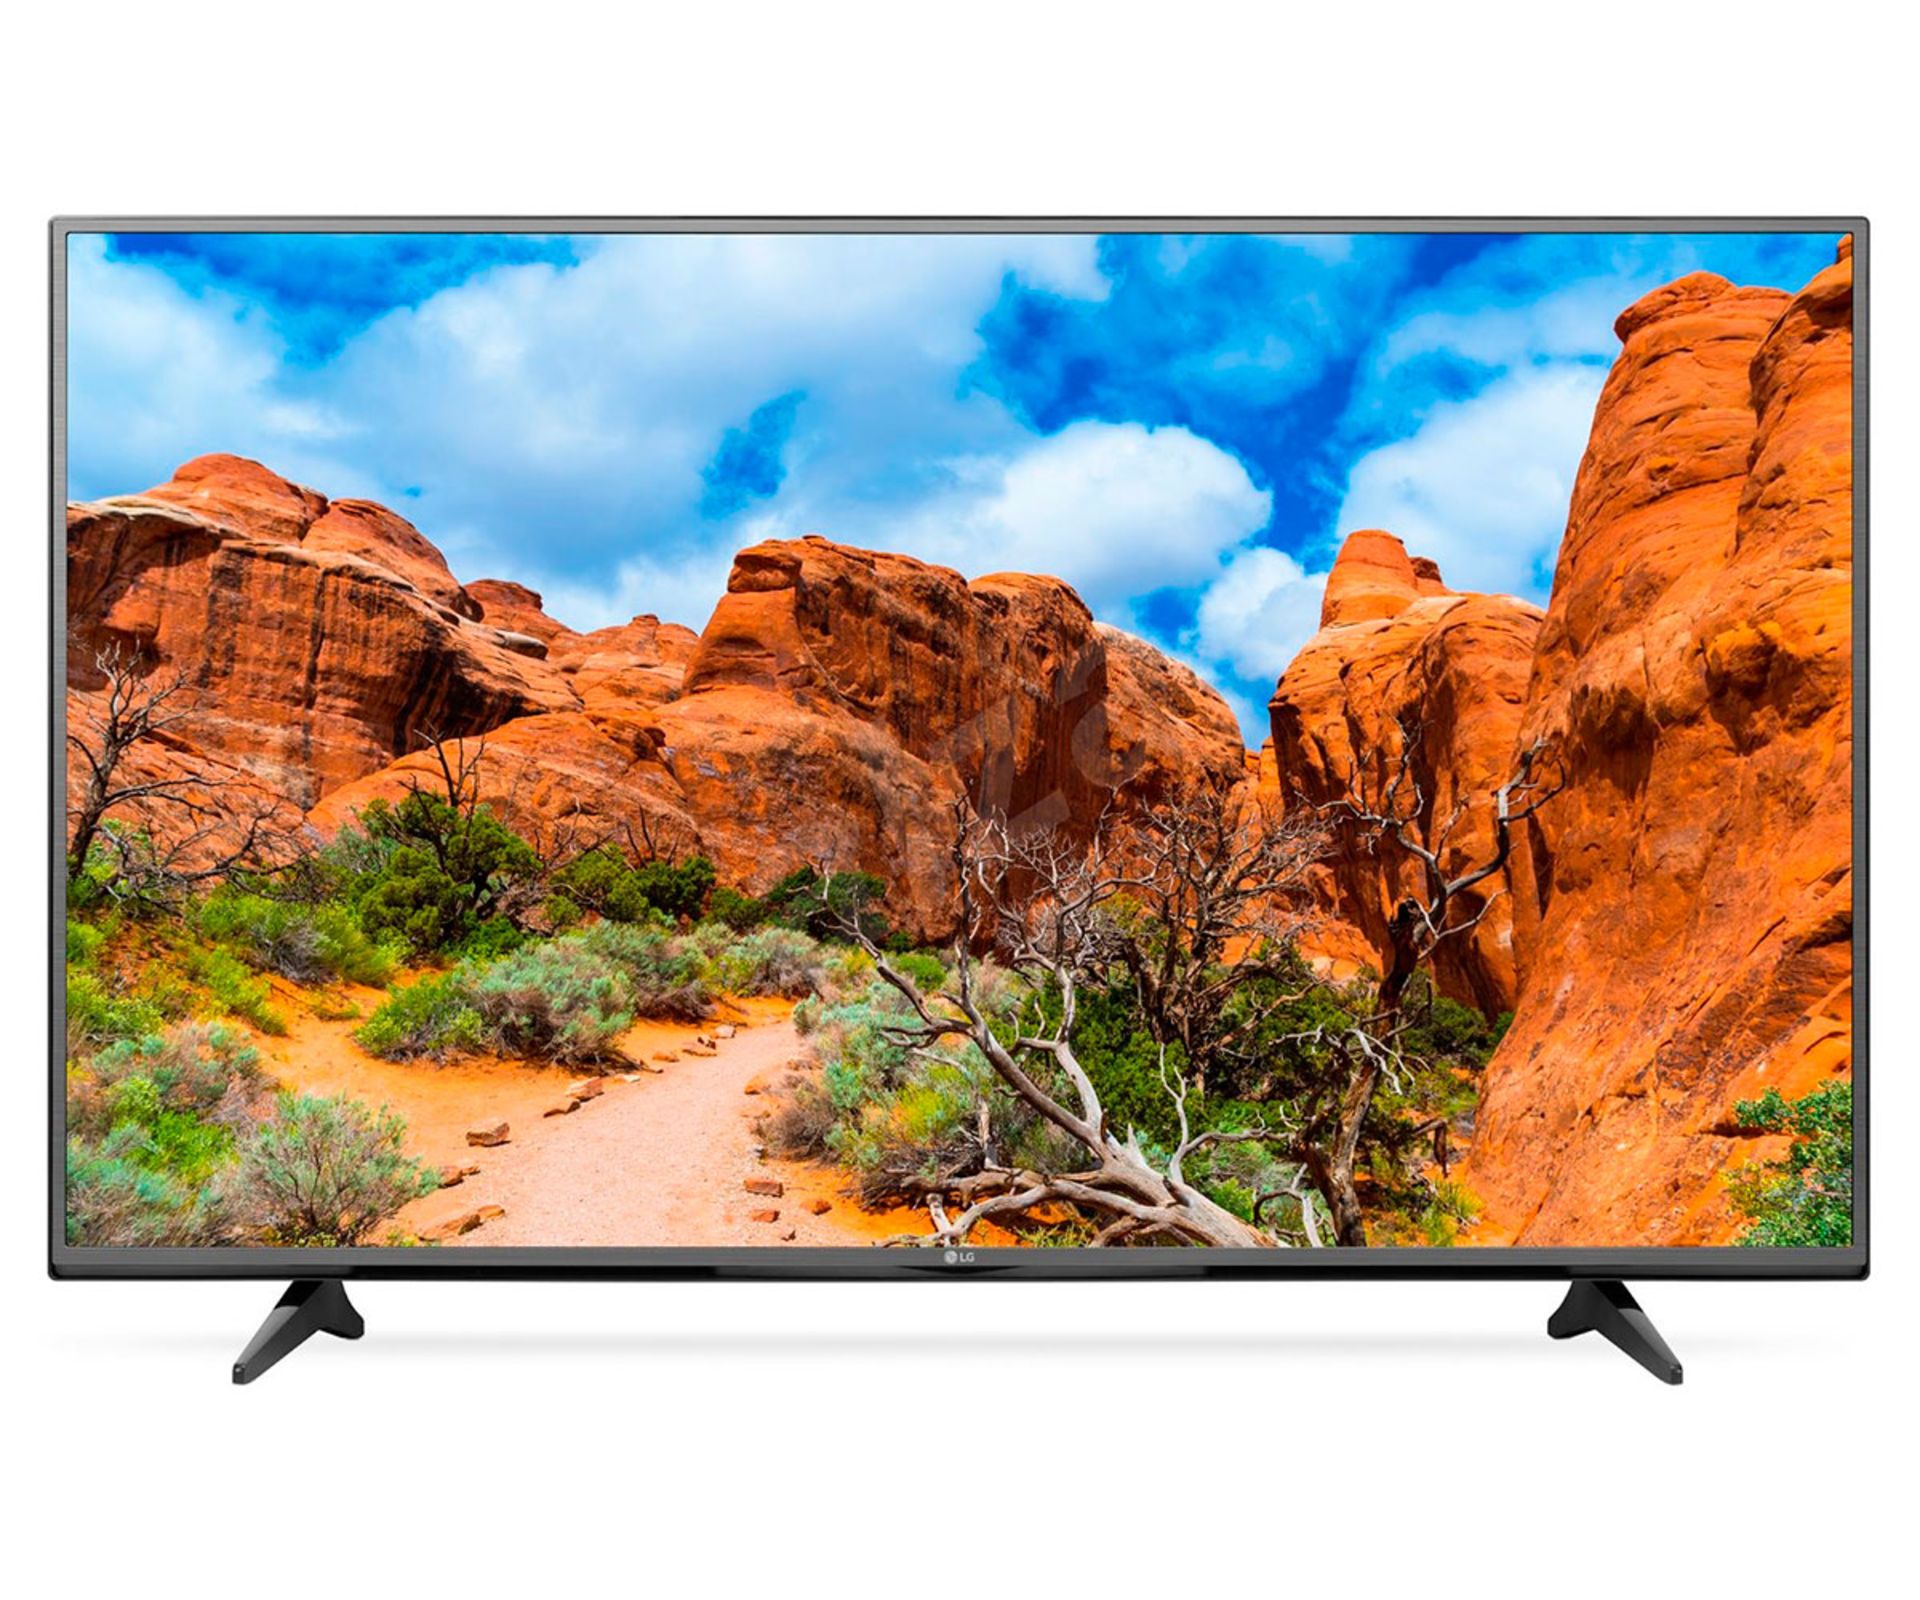 V *TRADE QTY* Grade A LG 49" 4K ULTRA HD SMART LED TV WITH FREEVIEW HD & WEBOS 2.0 49UF6407 X 3 YOUR